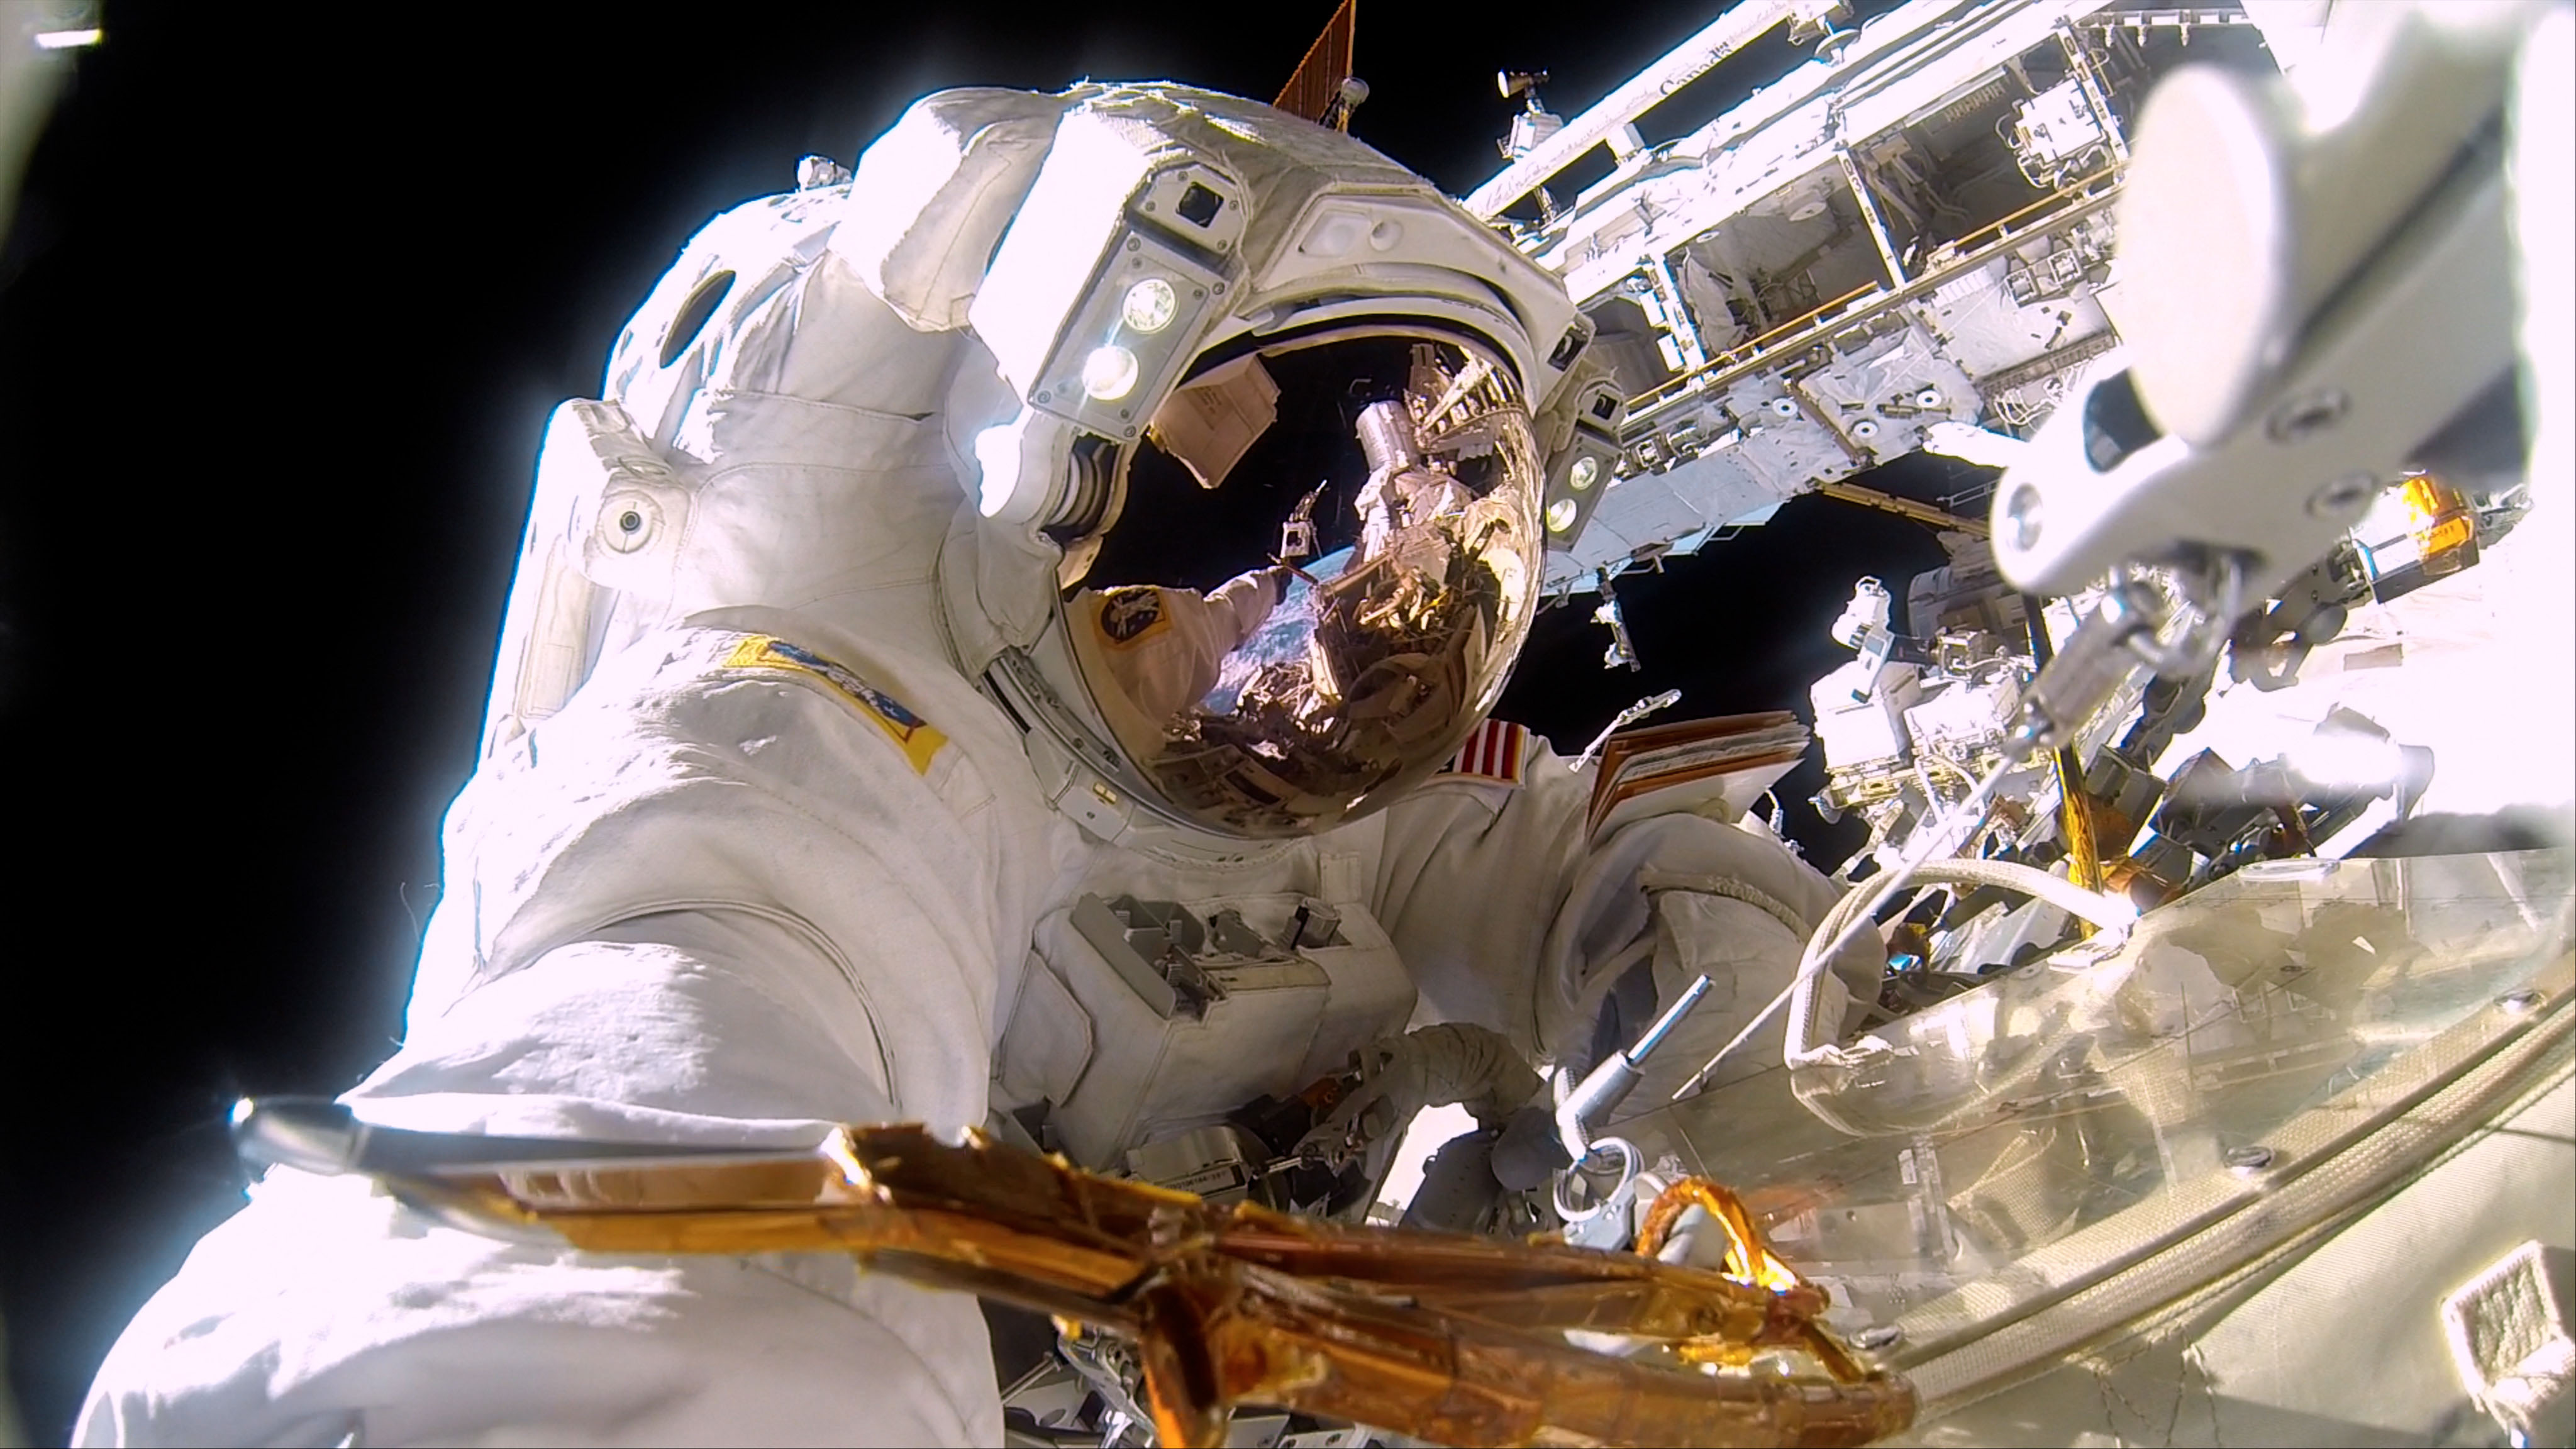 At left: NASA Commander Barry (Butch) Willmore on a spacewalk to repair the exterior of the International Space Station. It’s almost 300° on the sun side of the space station and -275° in the shade. Photo courtesy of NASA.